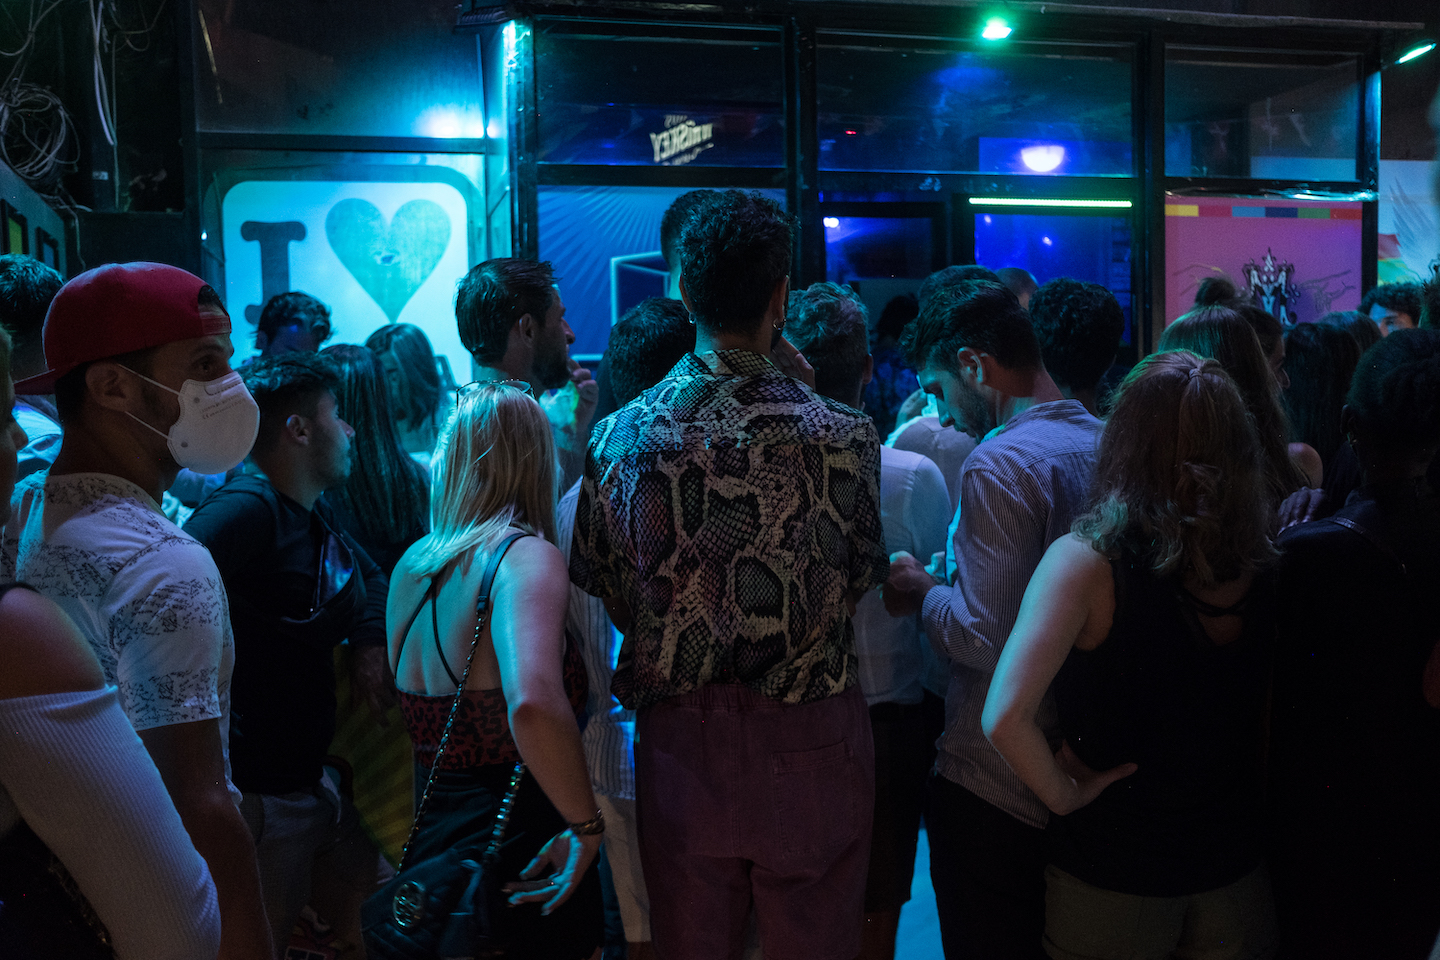 People wait to enter a club on July 10, 2021 in Paceville, Malta.